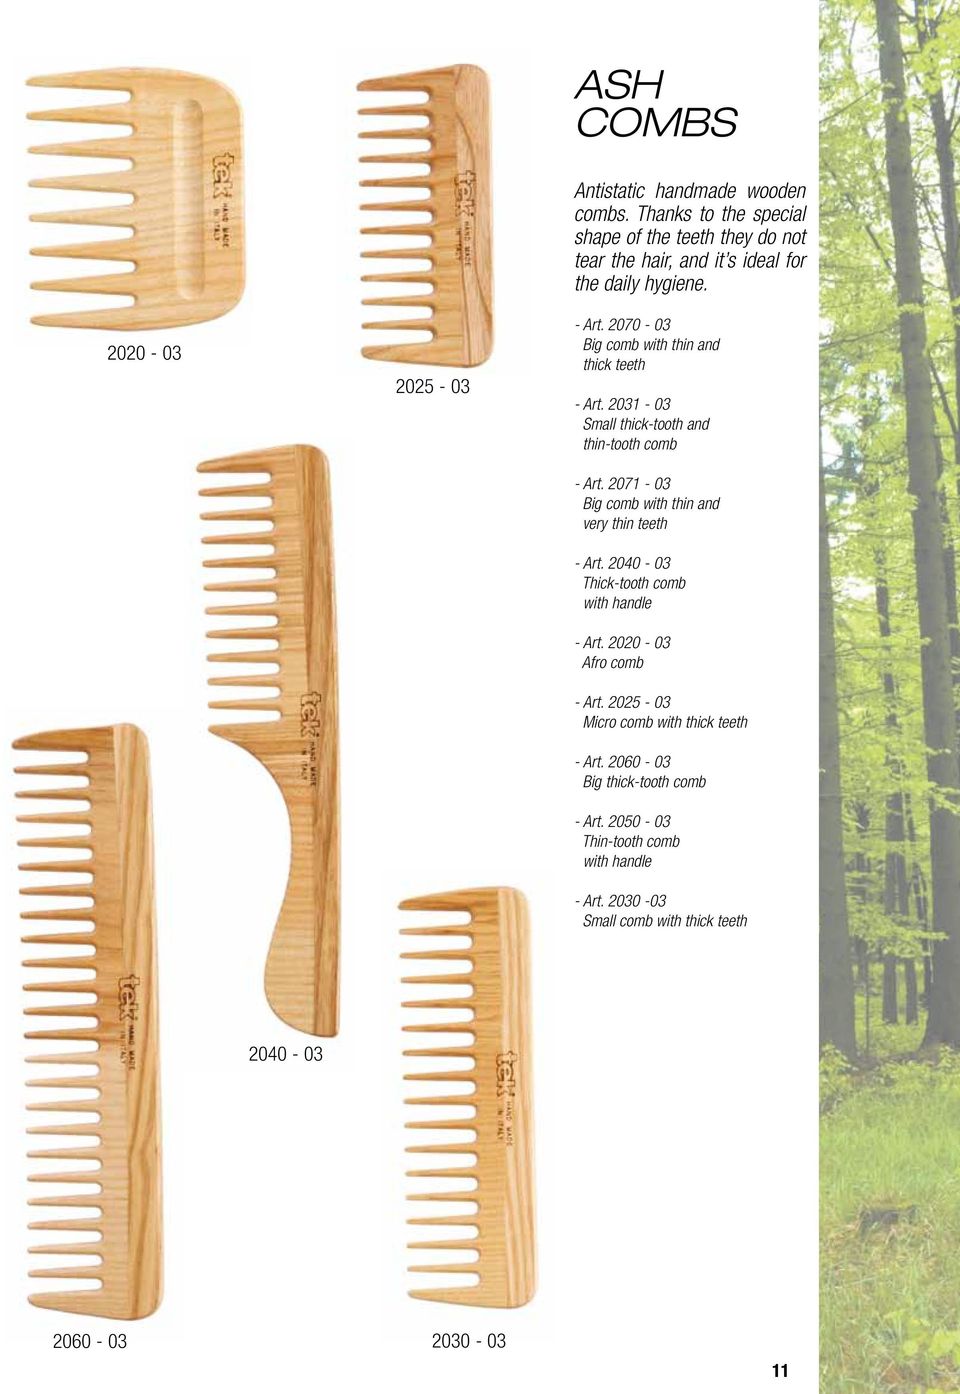 2070-03 Big comb with thin and thick teeth - Art. 2031-03 Small thick-tooth and thin-tooth comb - Art.